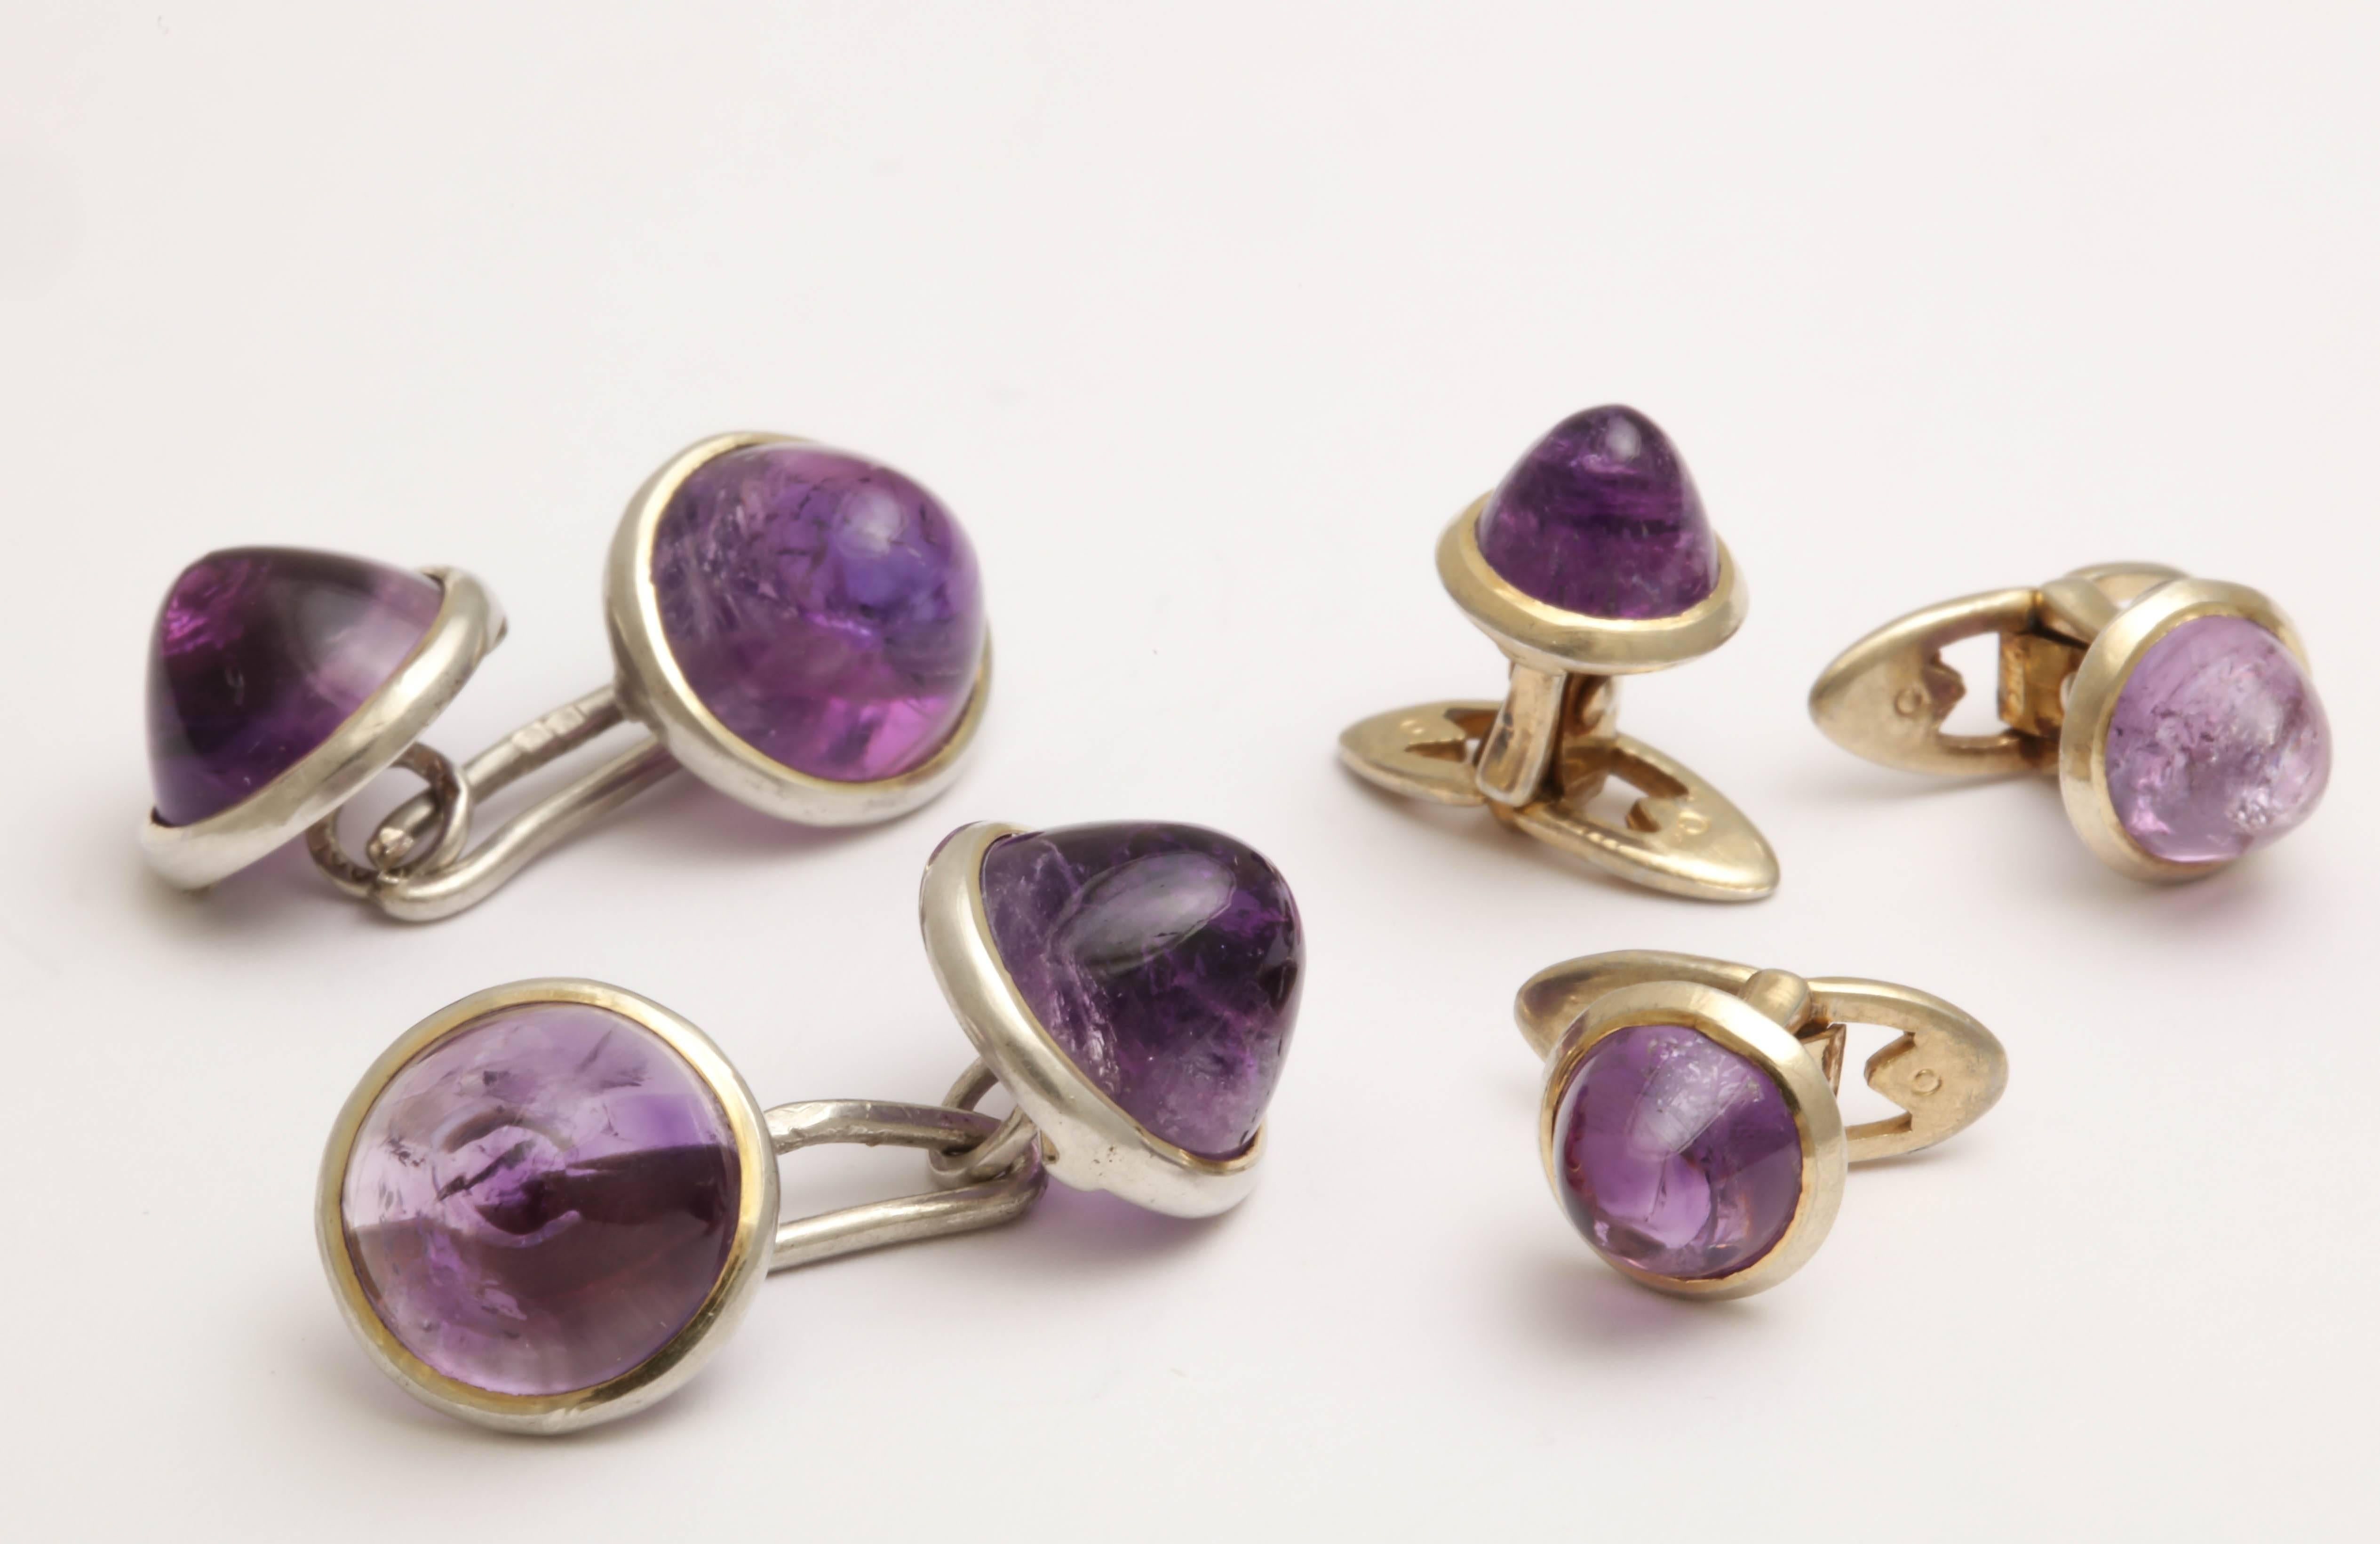 With pair of cufflinks and 3 studs,
With amethyst cabochons and silver border – 0.35 ozs. gross
Impressed S830/ GS.